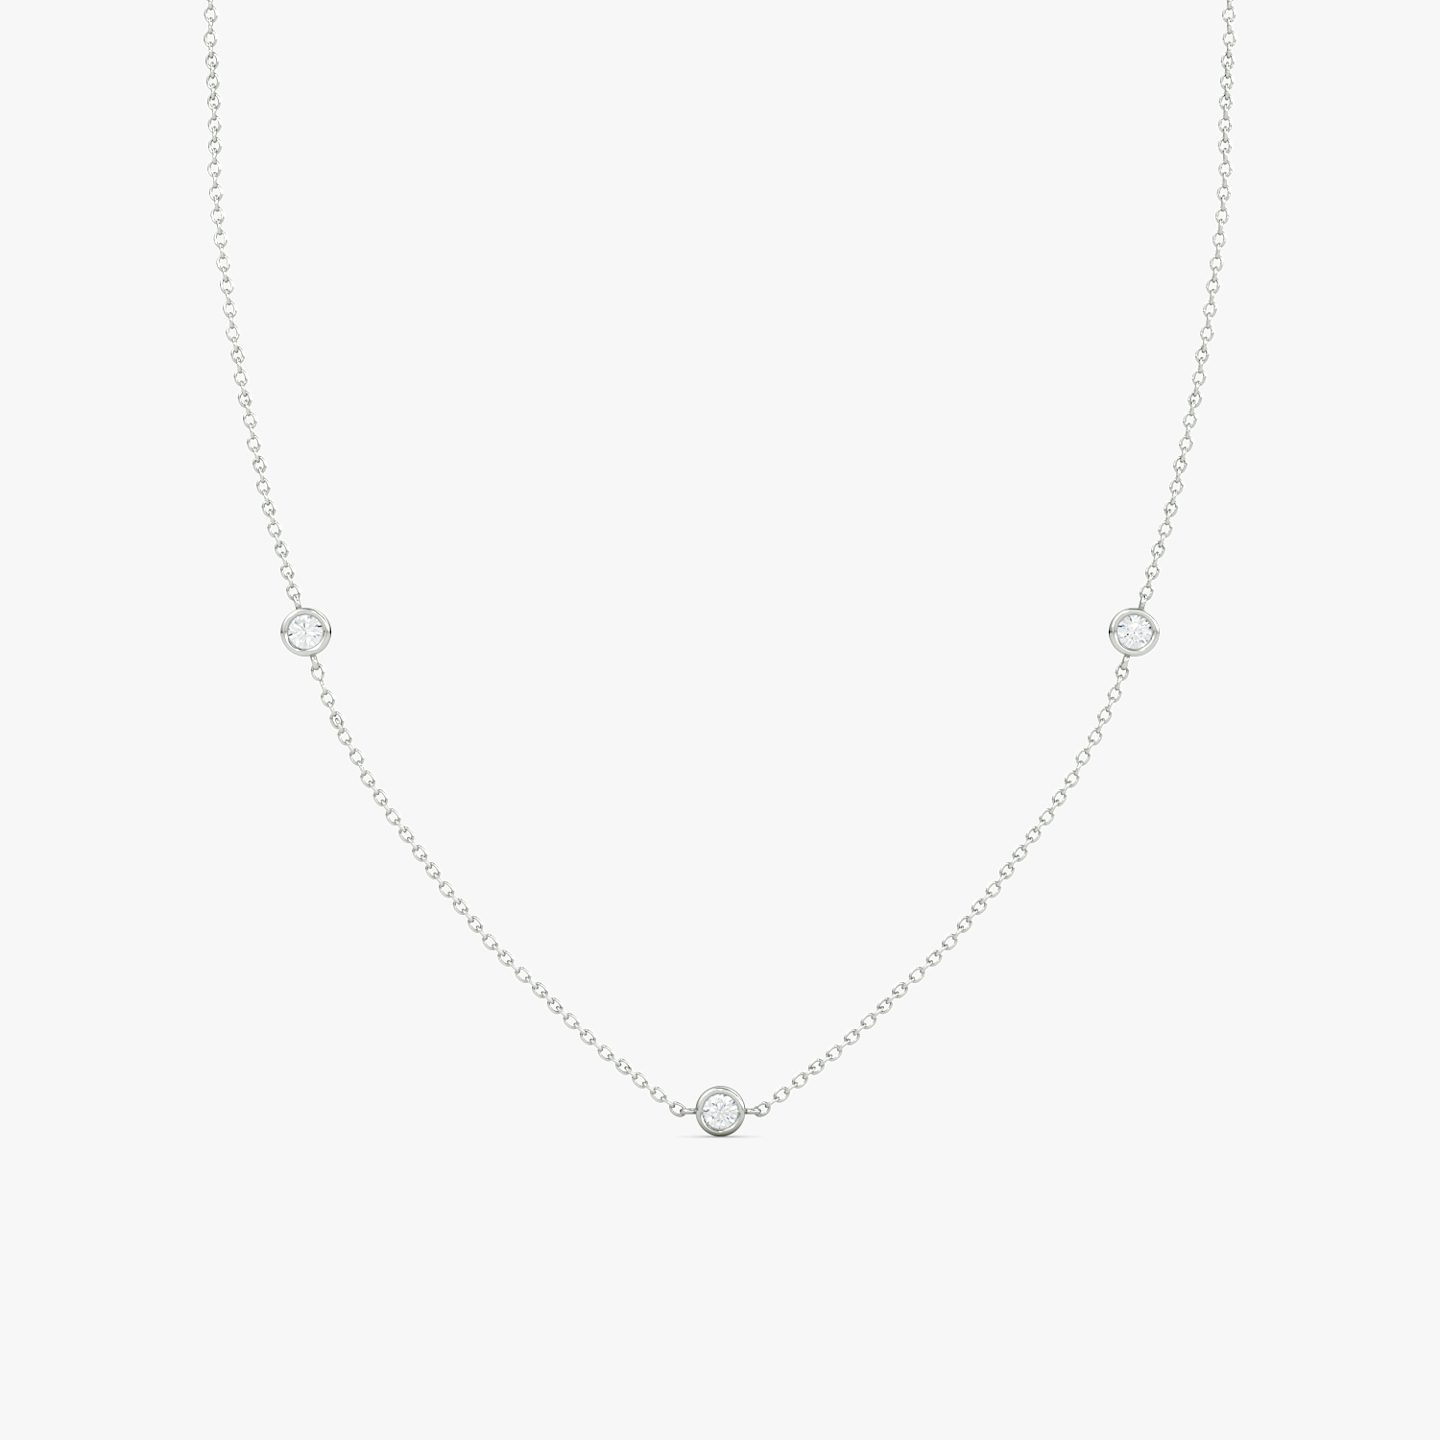 Silver Bezel Station Necklace | Round Brilliant | Sterling Silver | Diamond count: 3 | Chain length: 16-18